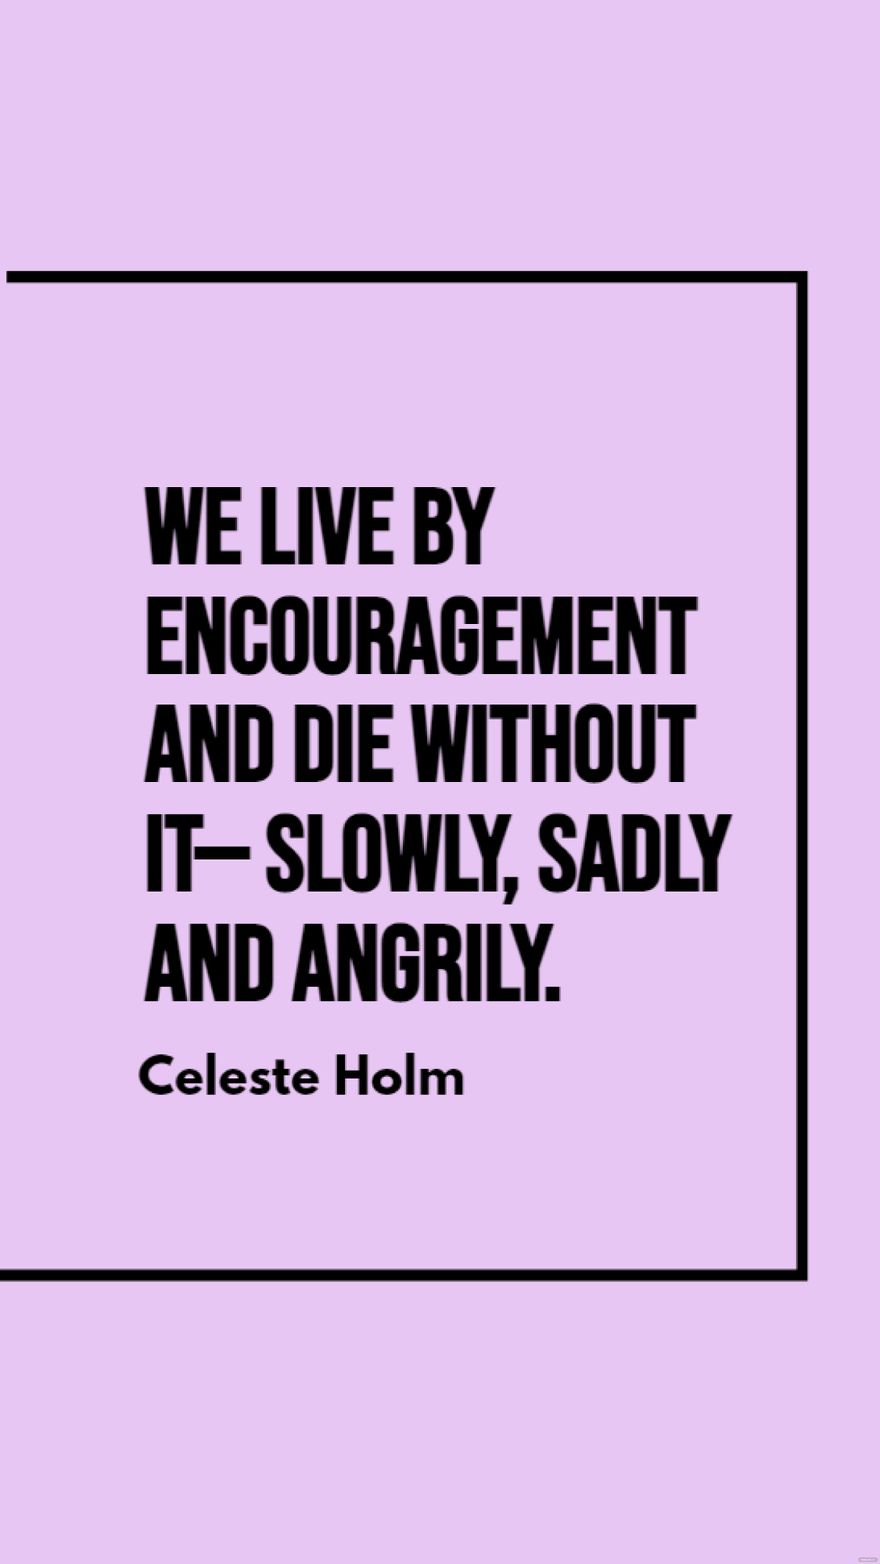 Celeste Holm - We live by encouragement and die without it - slowly, sadly and angrily. in JPG